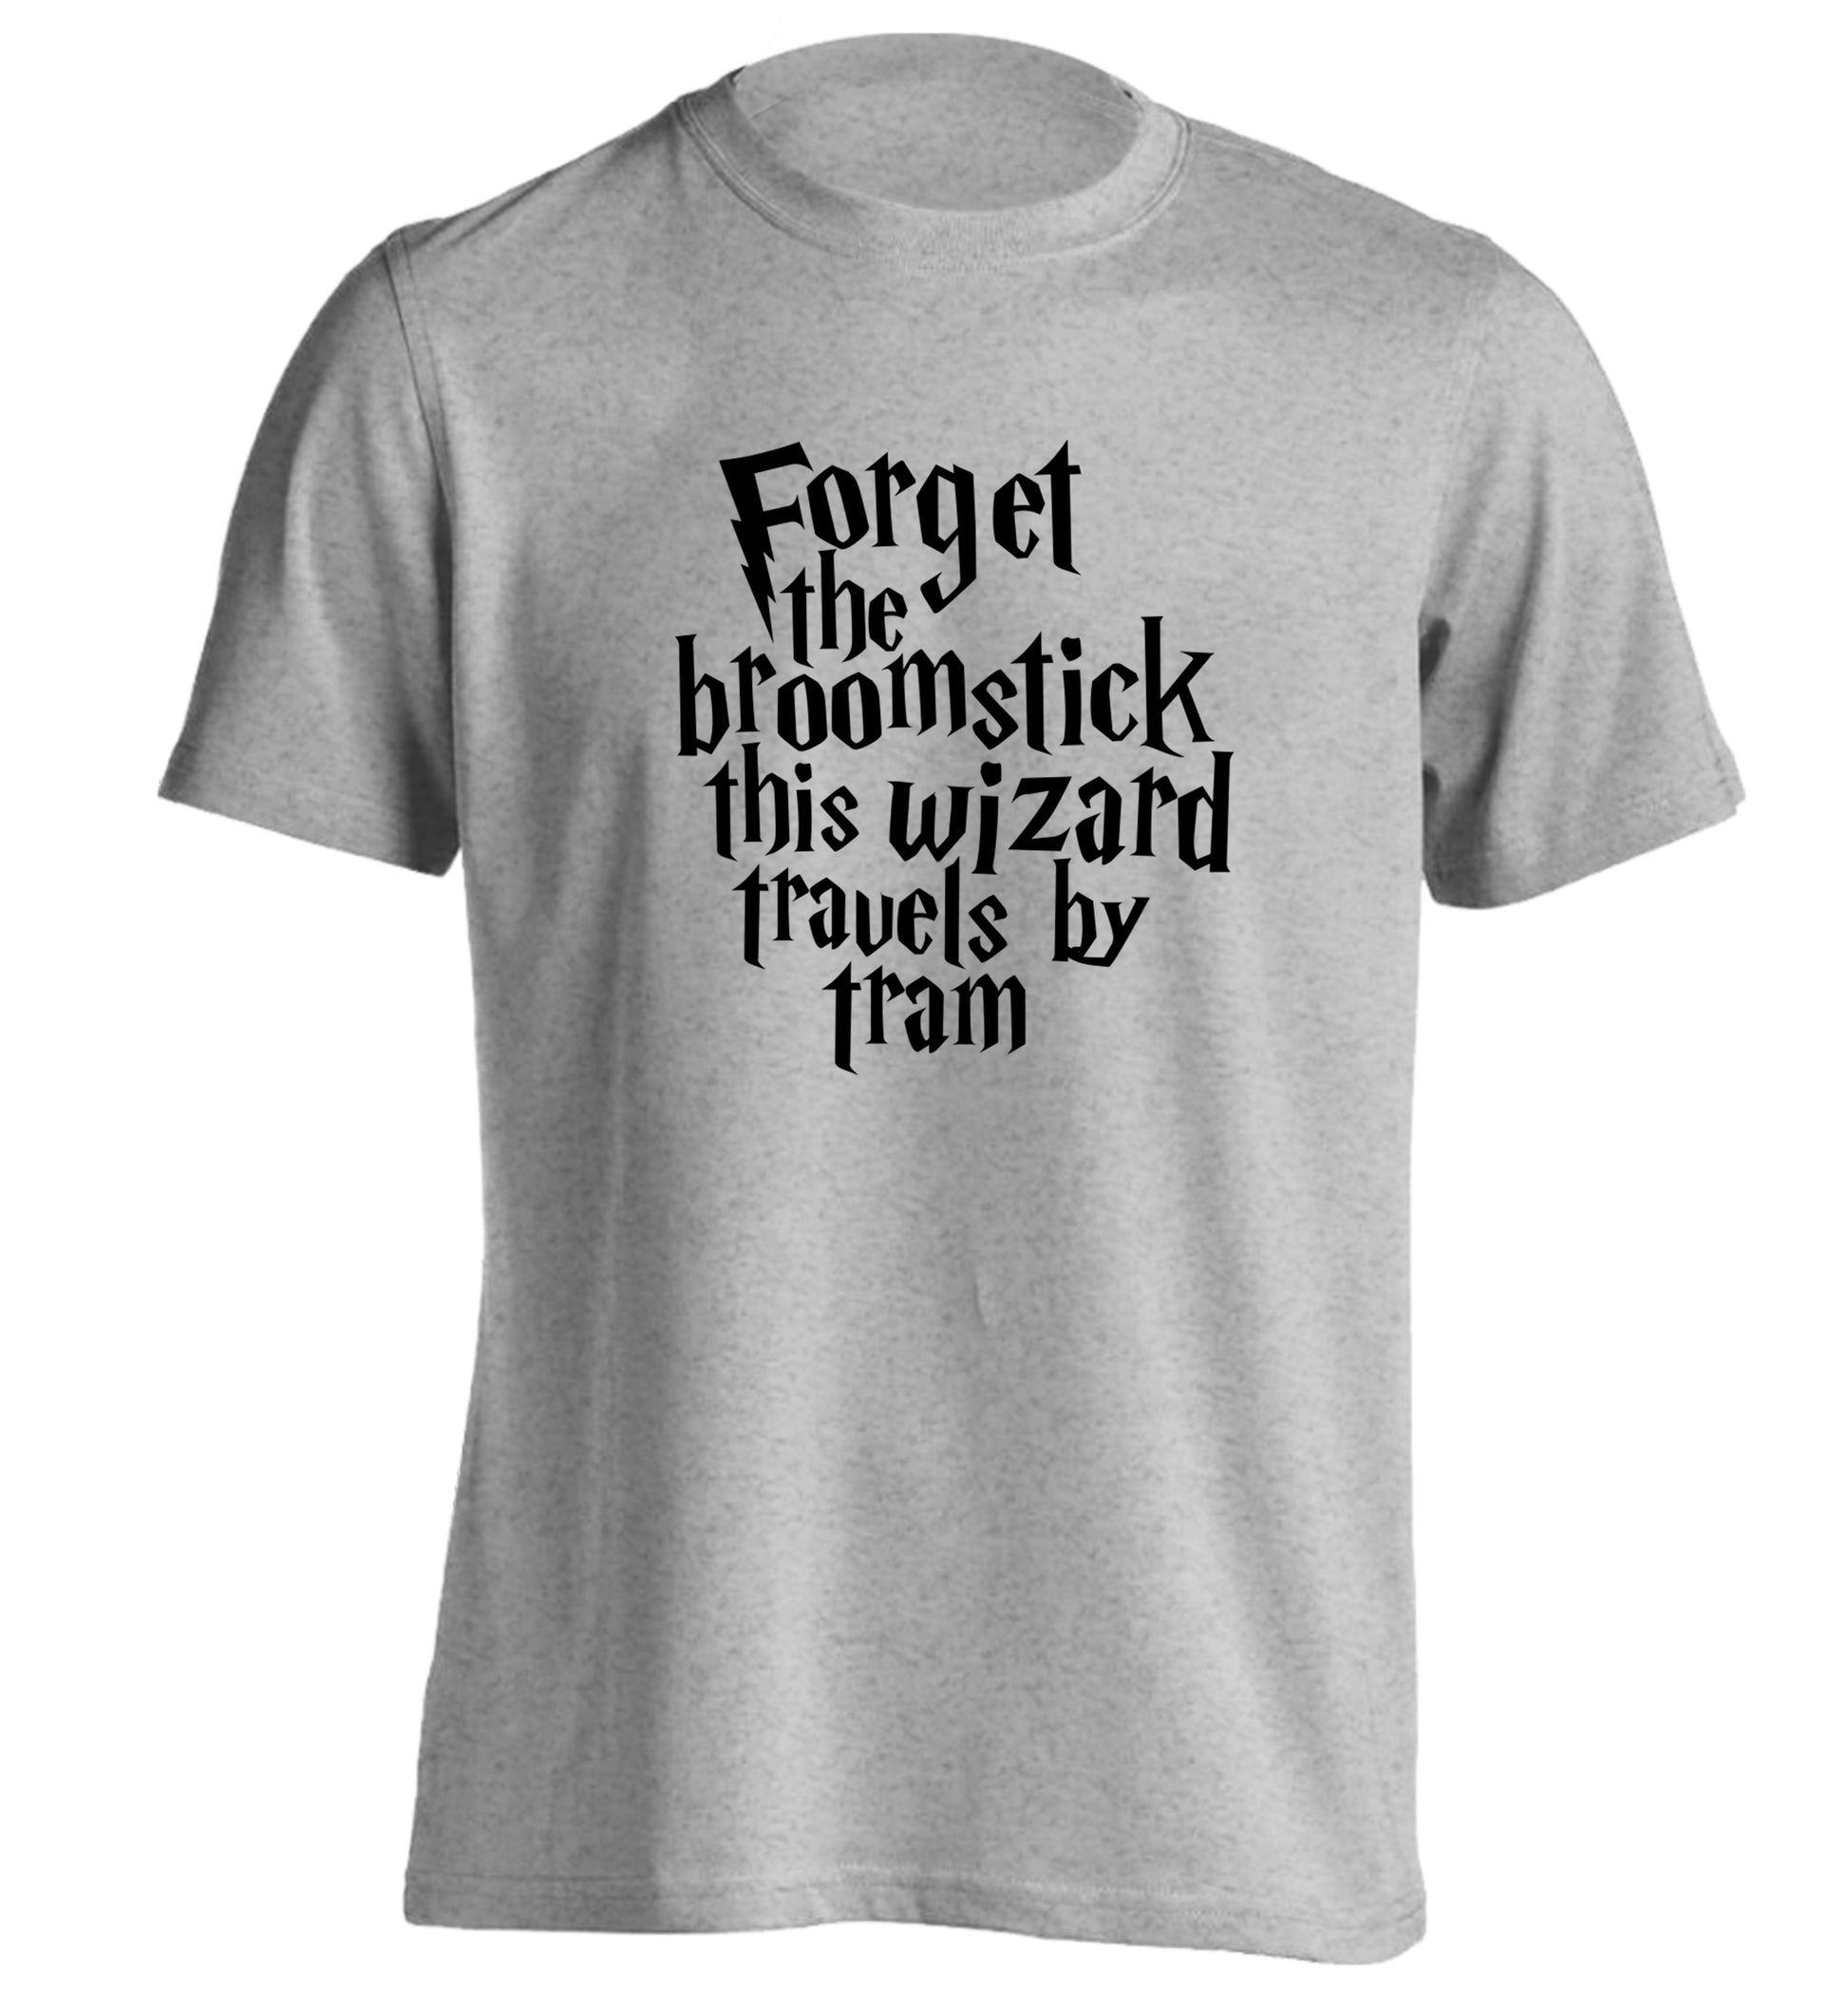 Forget the broomstick this wizard travels by tram adults unisexgrey Tshirt 2XL